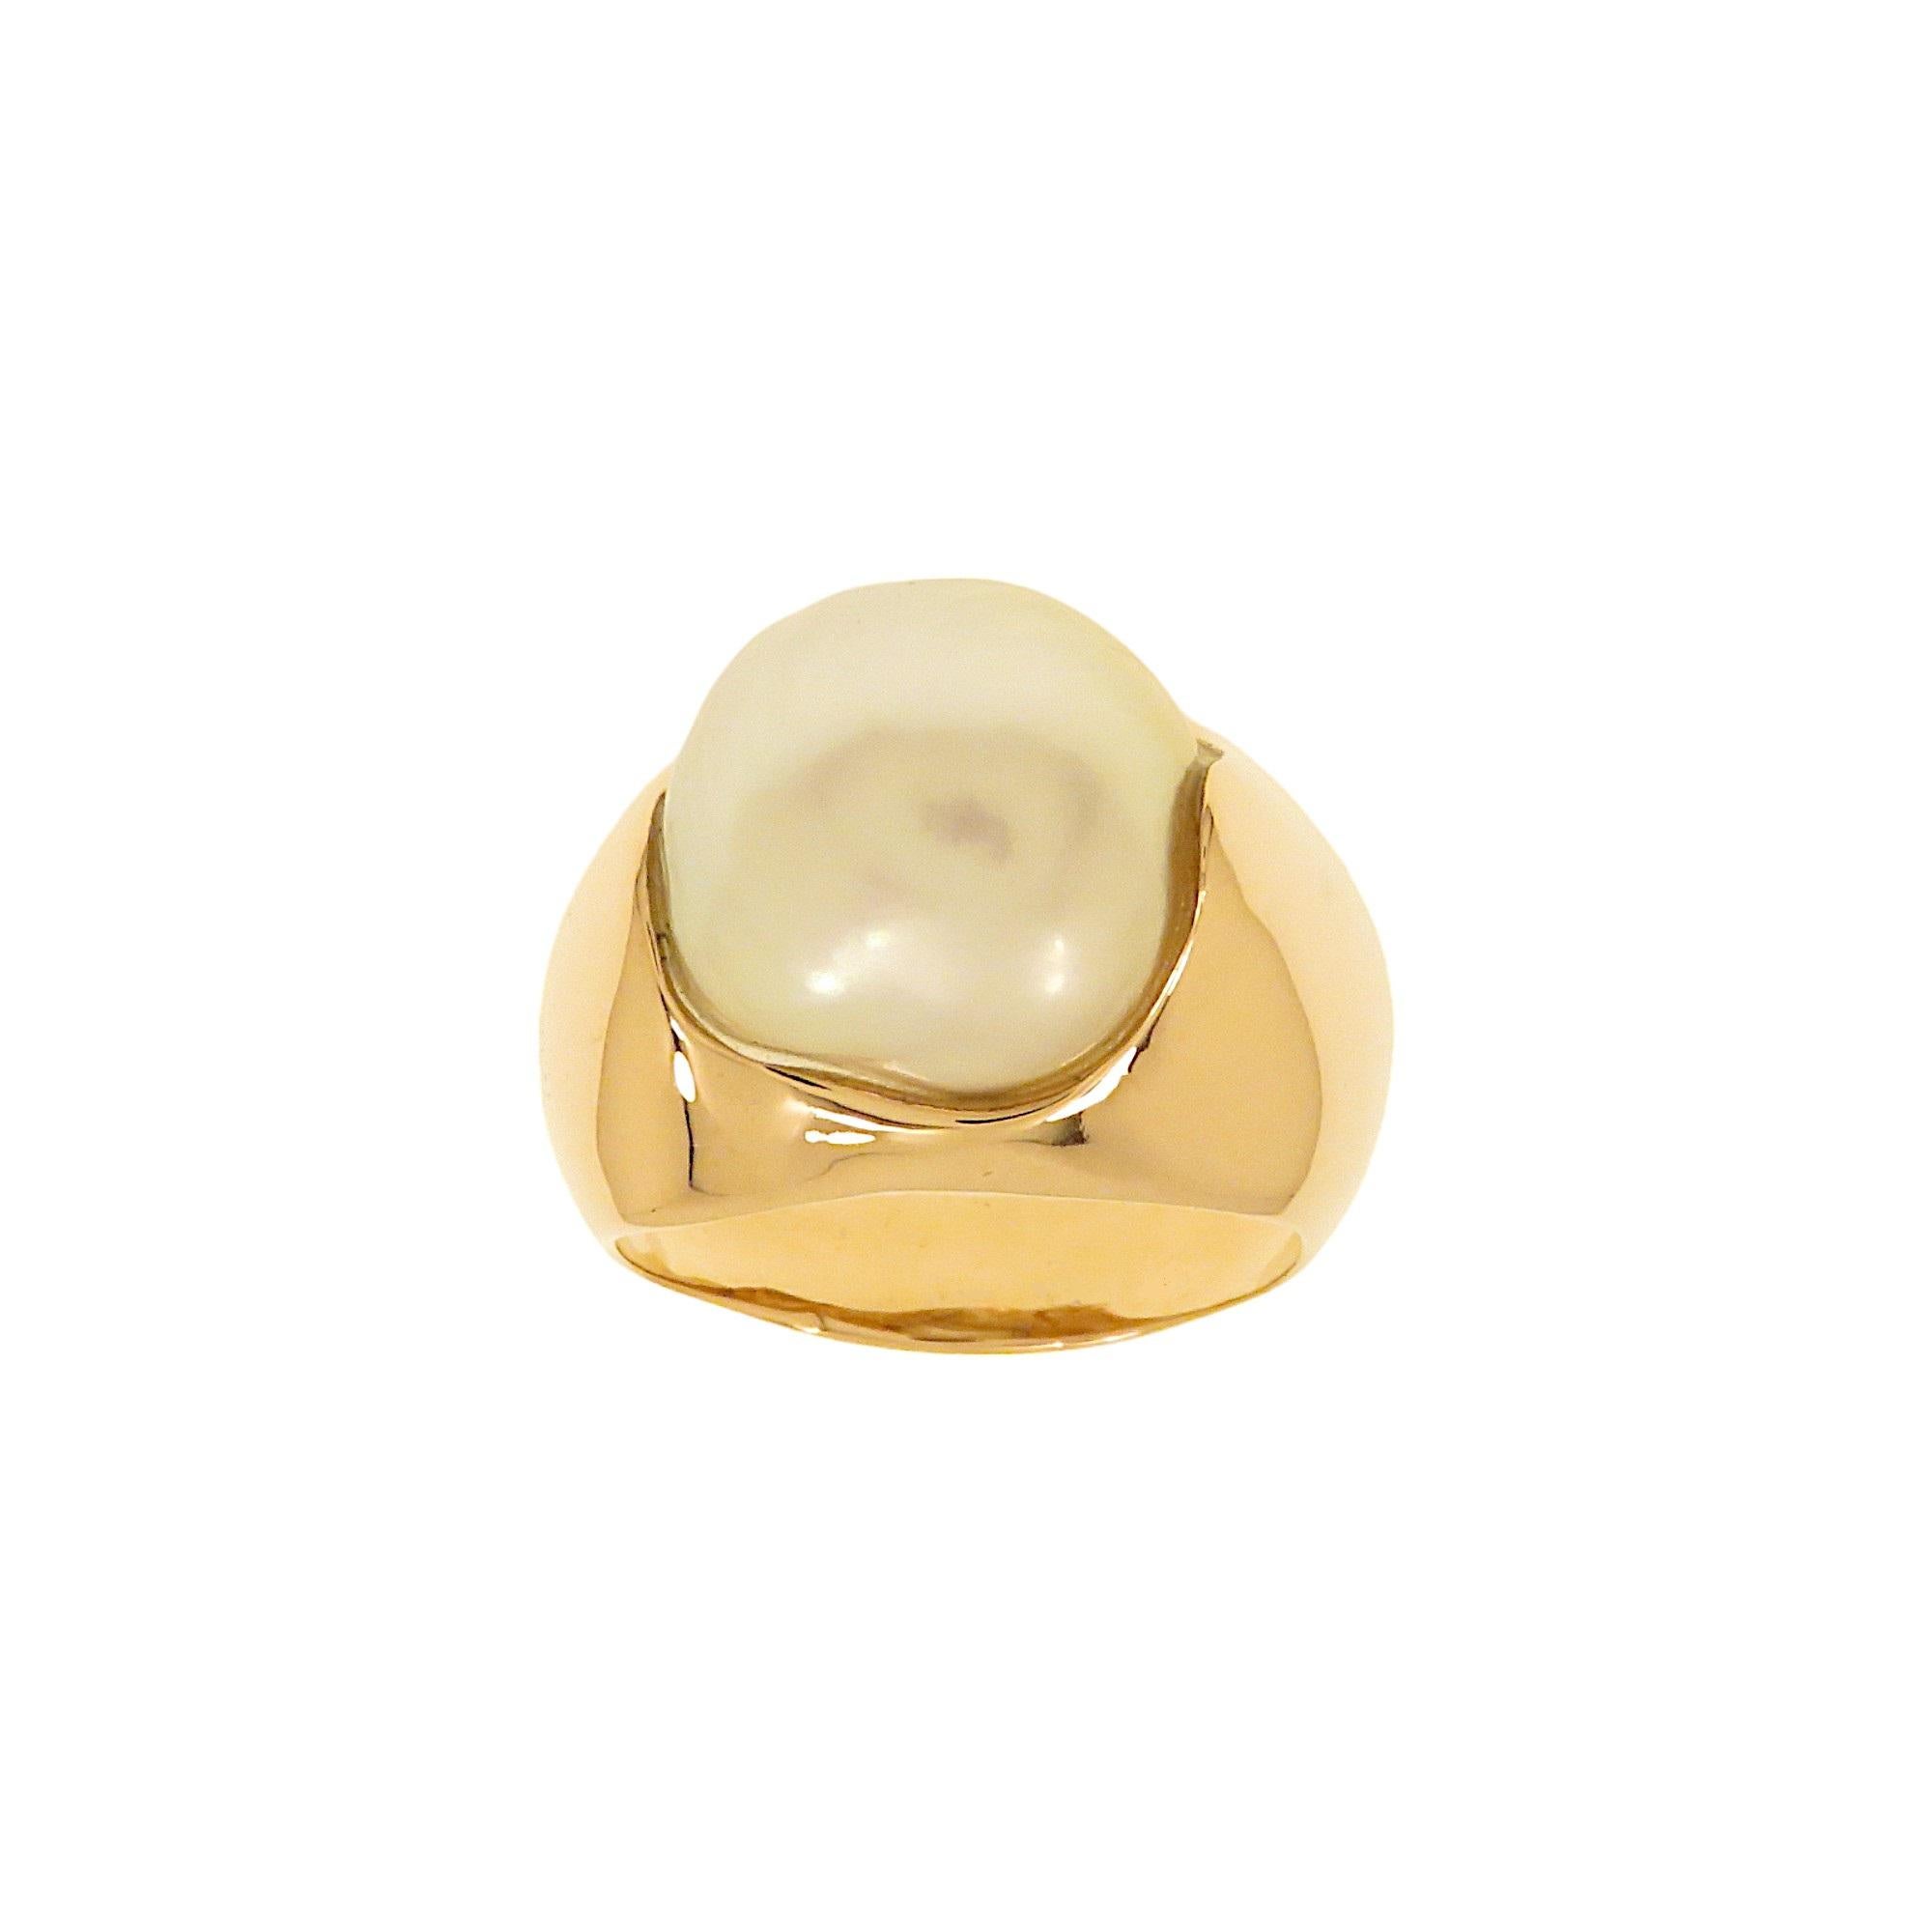 Refined 9k rose gold ring crafted to harmoniously encircle a stunning Australian Baroque pearl measuring 15x13 mm / 0.59x0.51 inches for a weight of 15 carats.  The pearl grown in Australia has an extraordinarily beautiful silver-white color and is